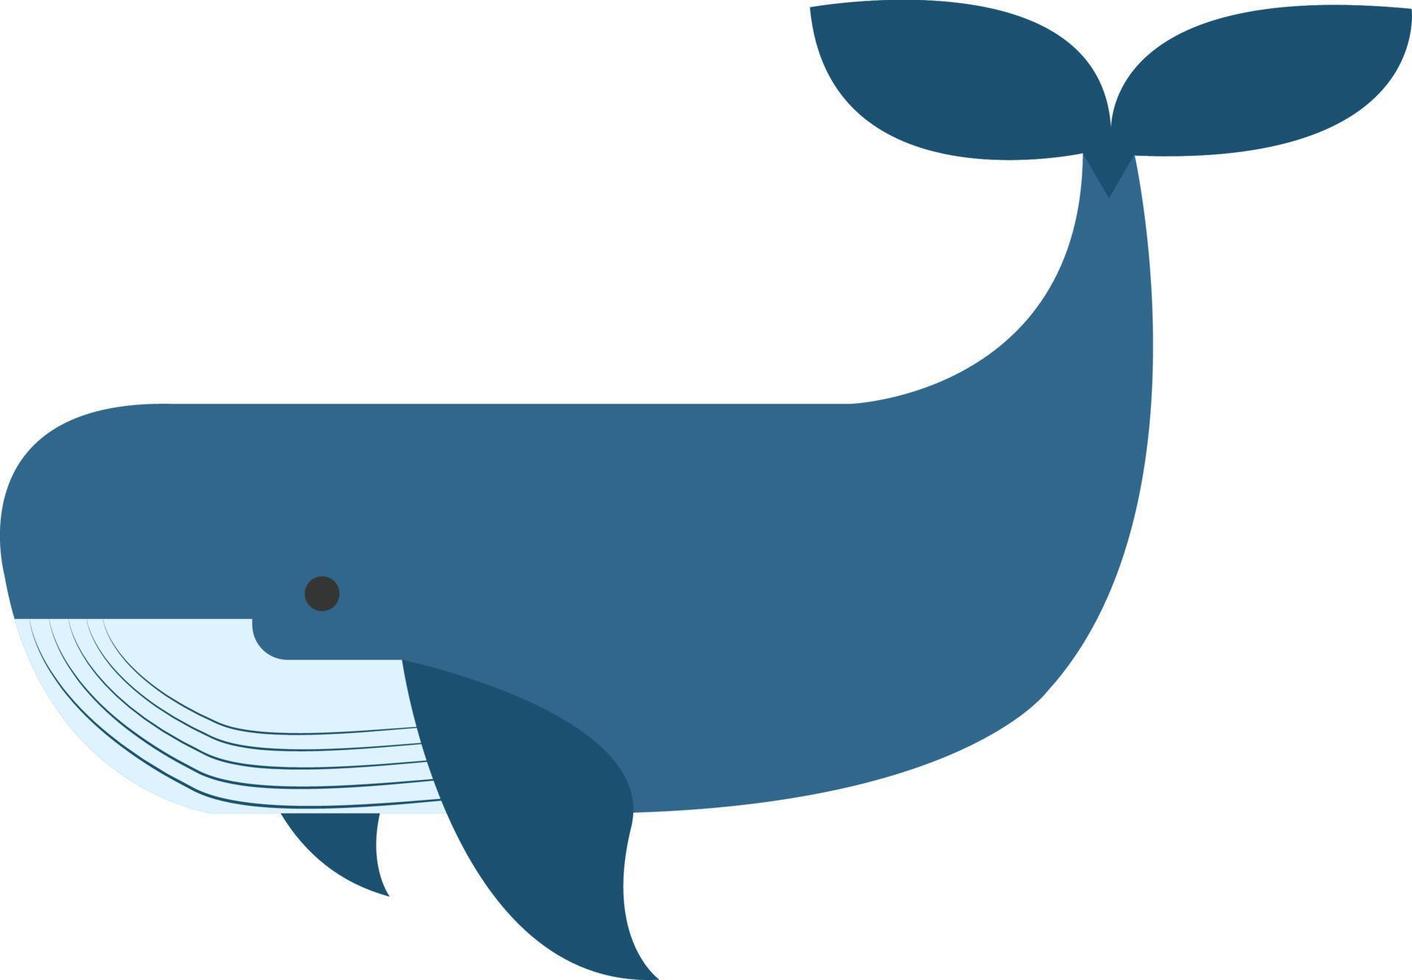 Blue whale, illustration, vector on white background.